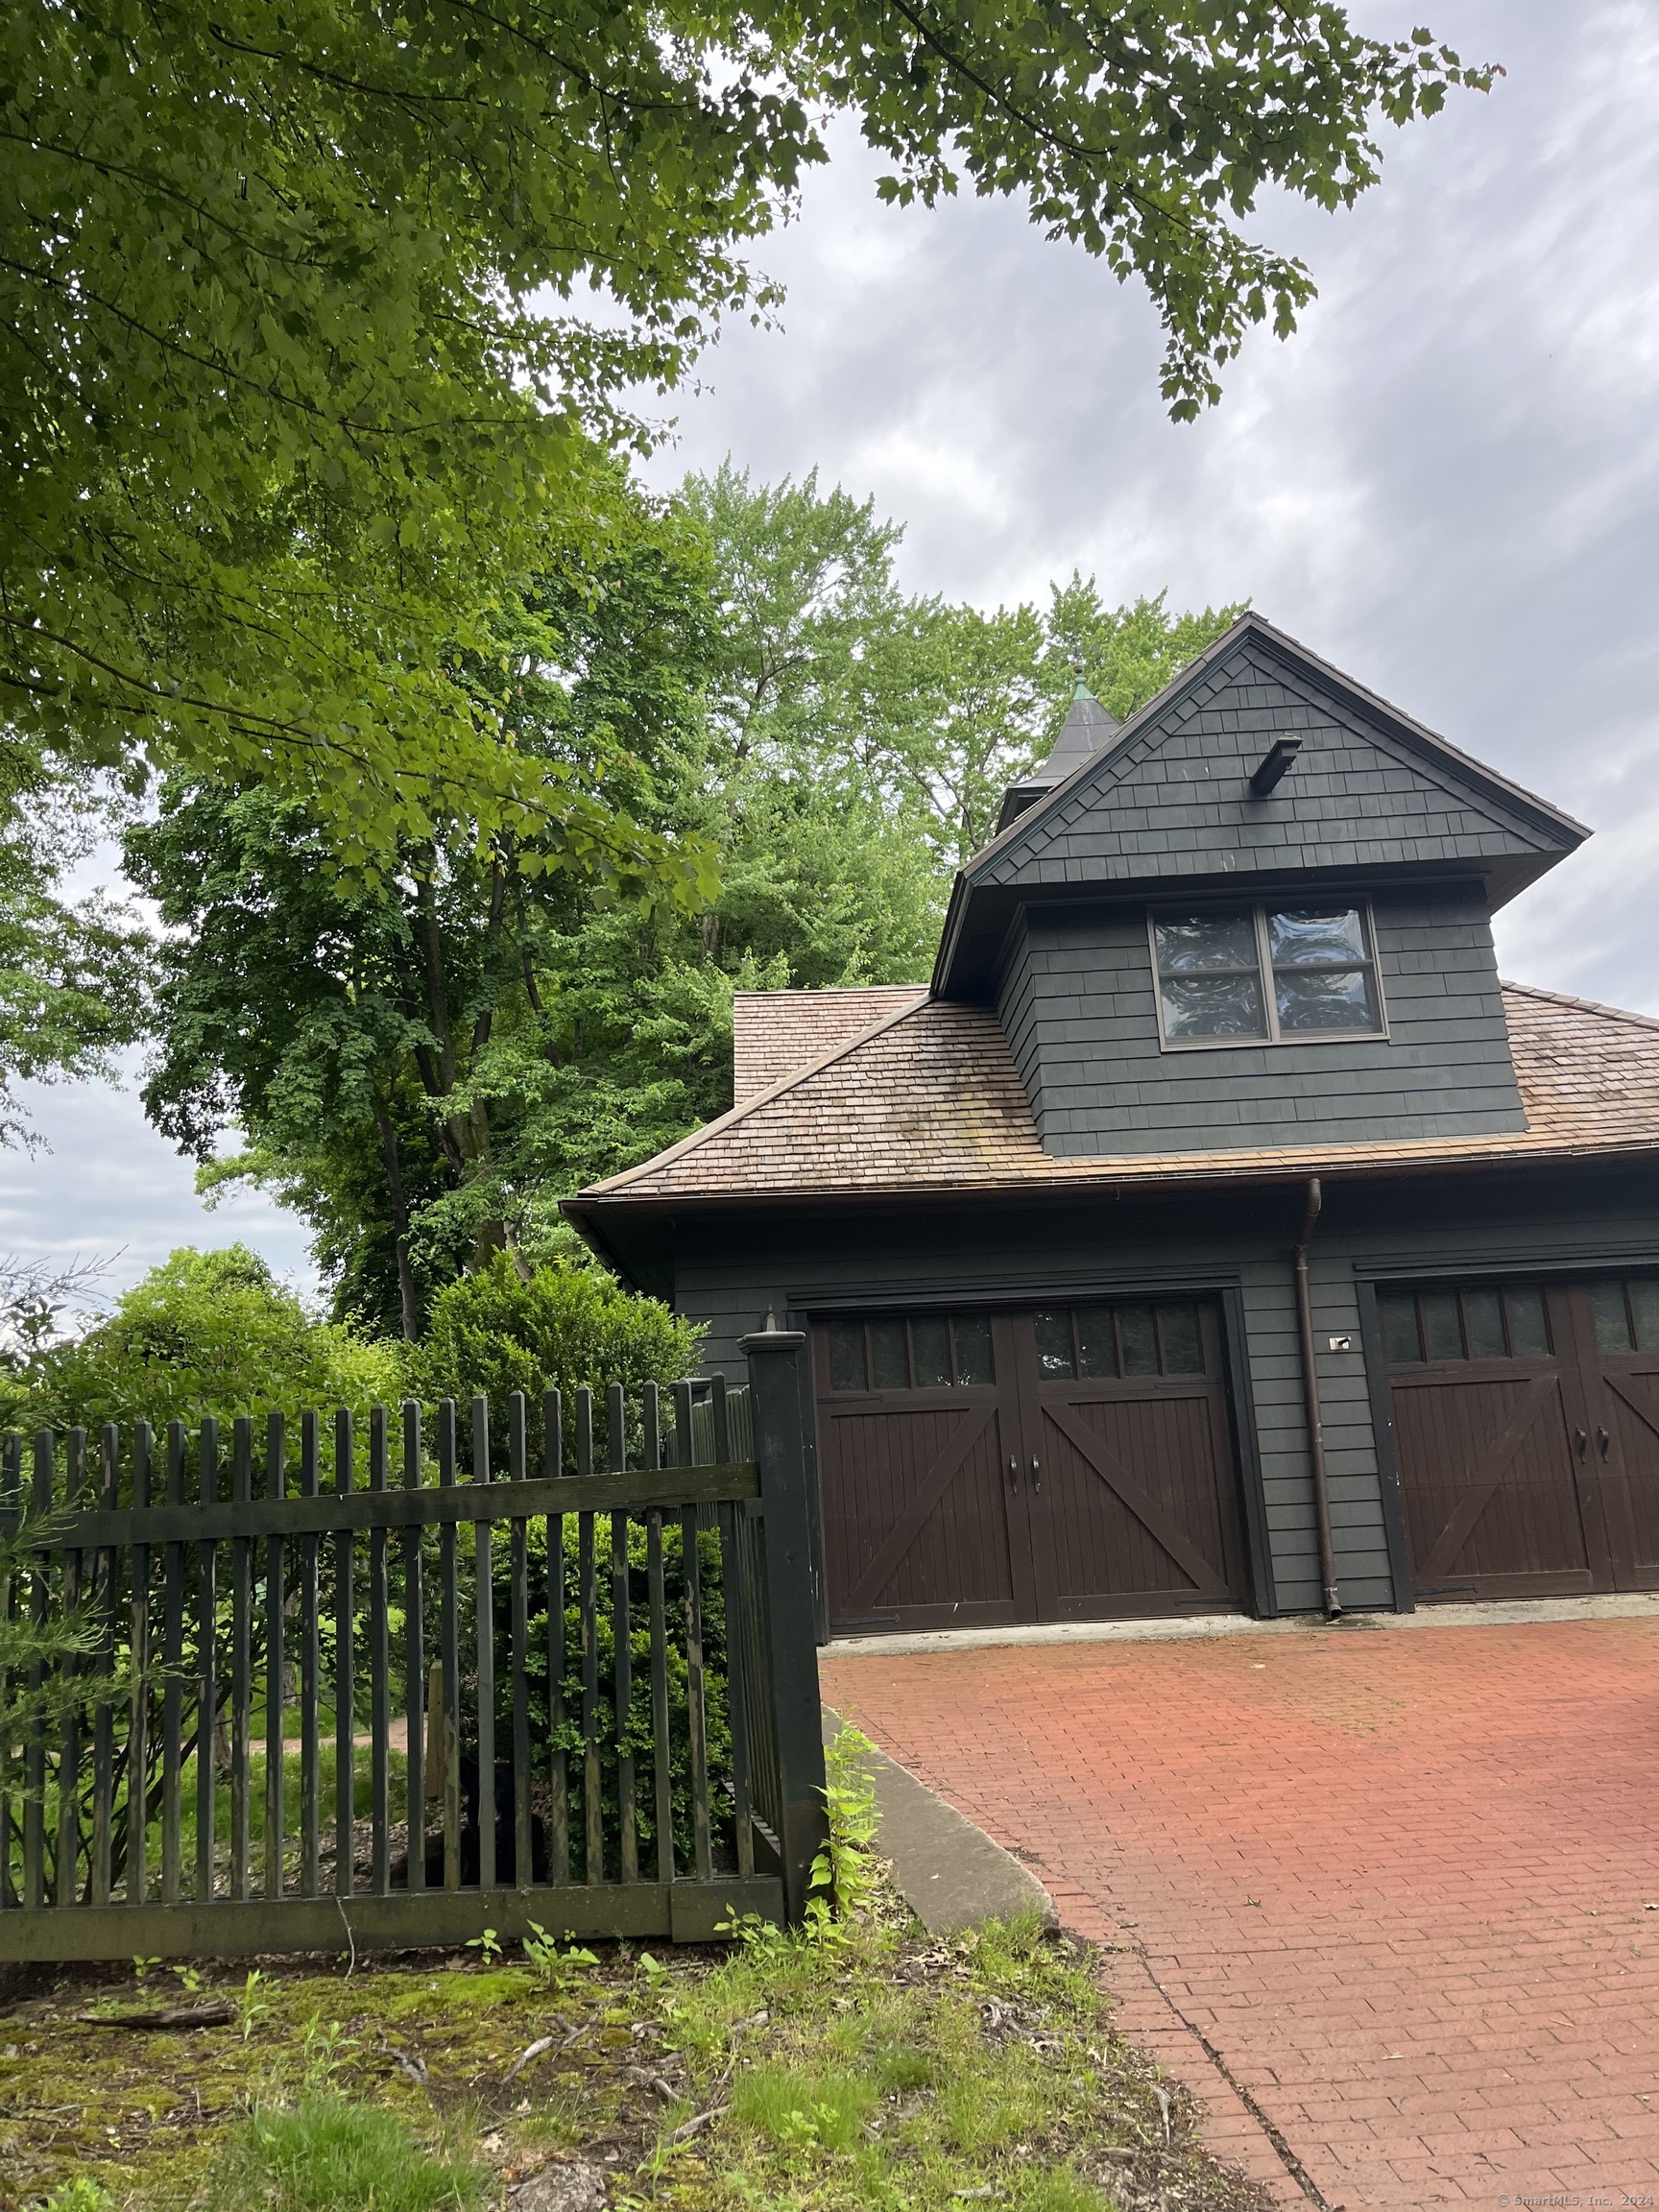 Rental Property at 55 Lorraine Street, Hartford, Connecticut - Bedrooms: 1 
Bathrooms: 1 
Rooms: 4  - $2,000 MO.